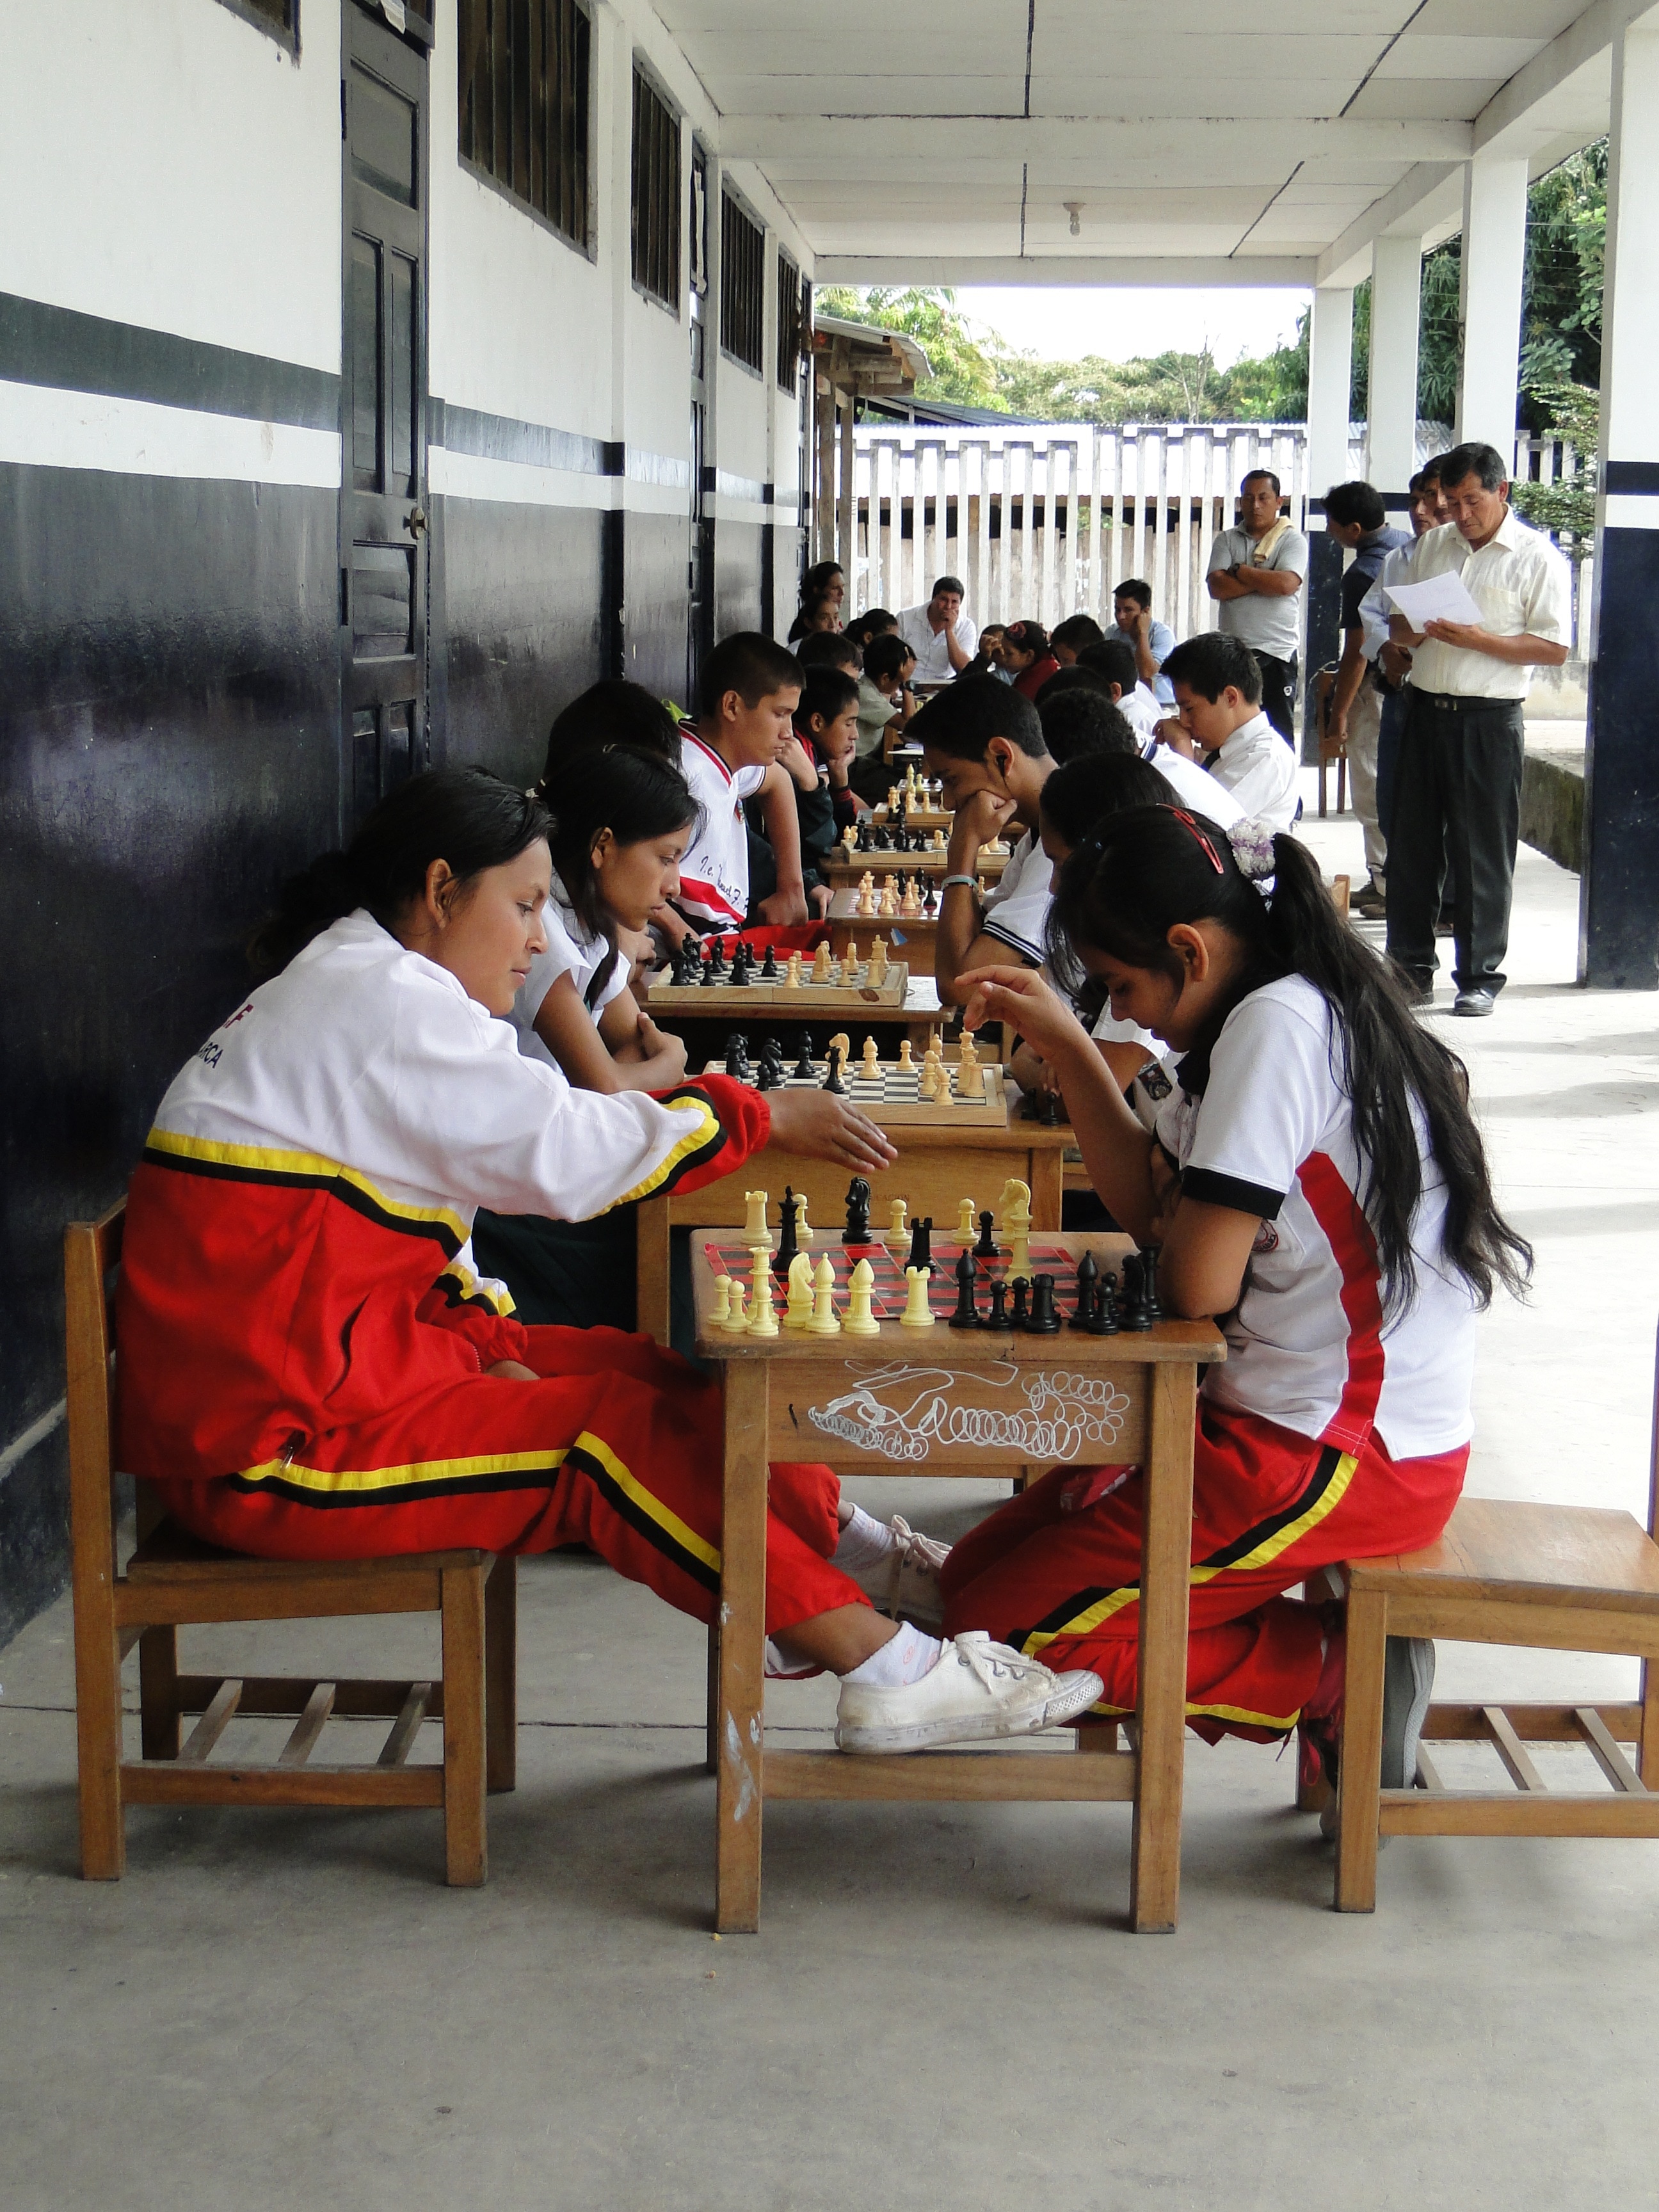 chess competition